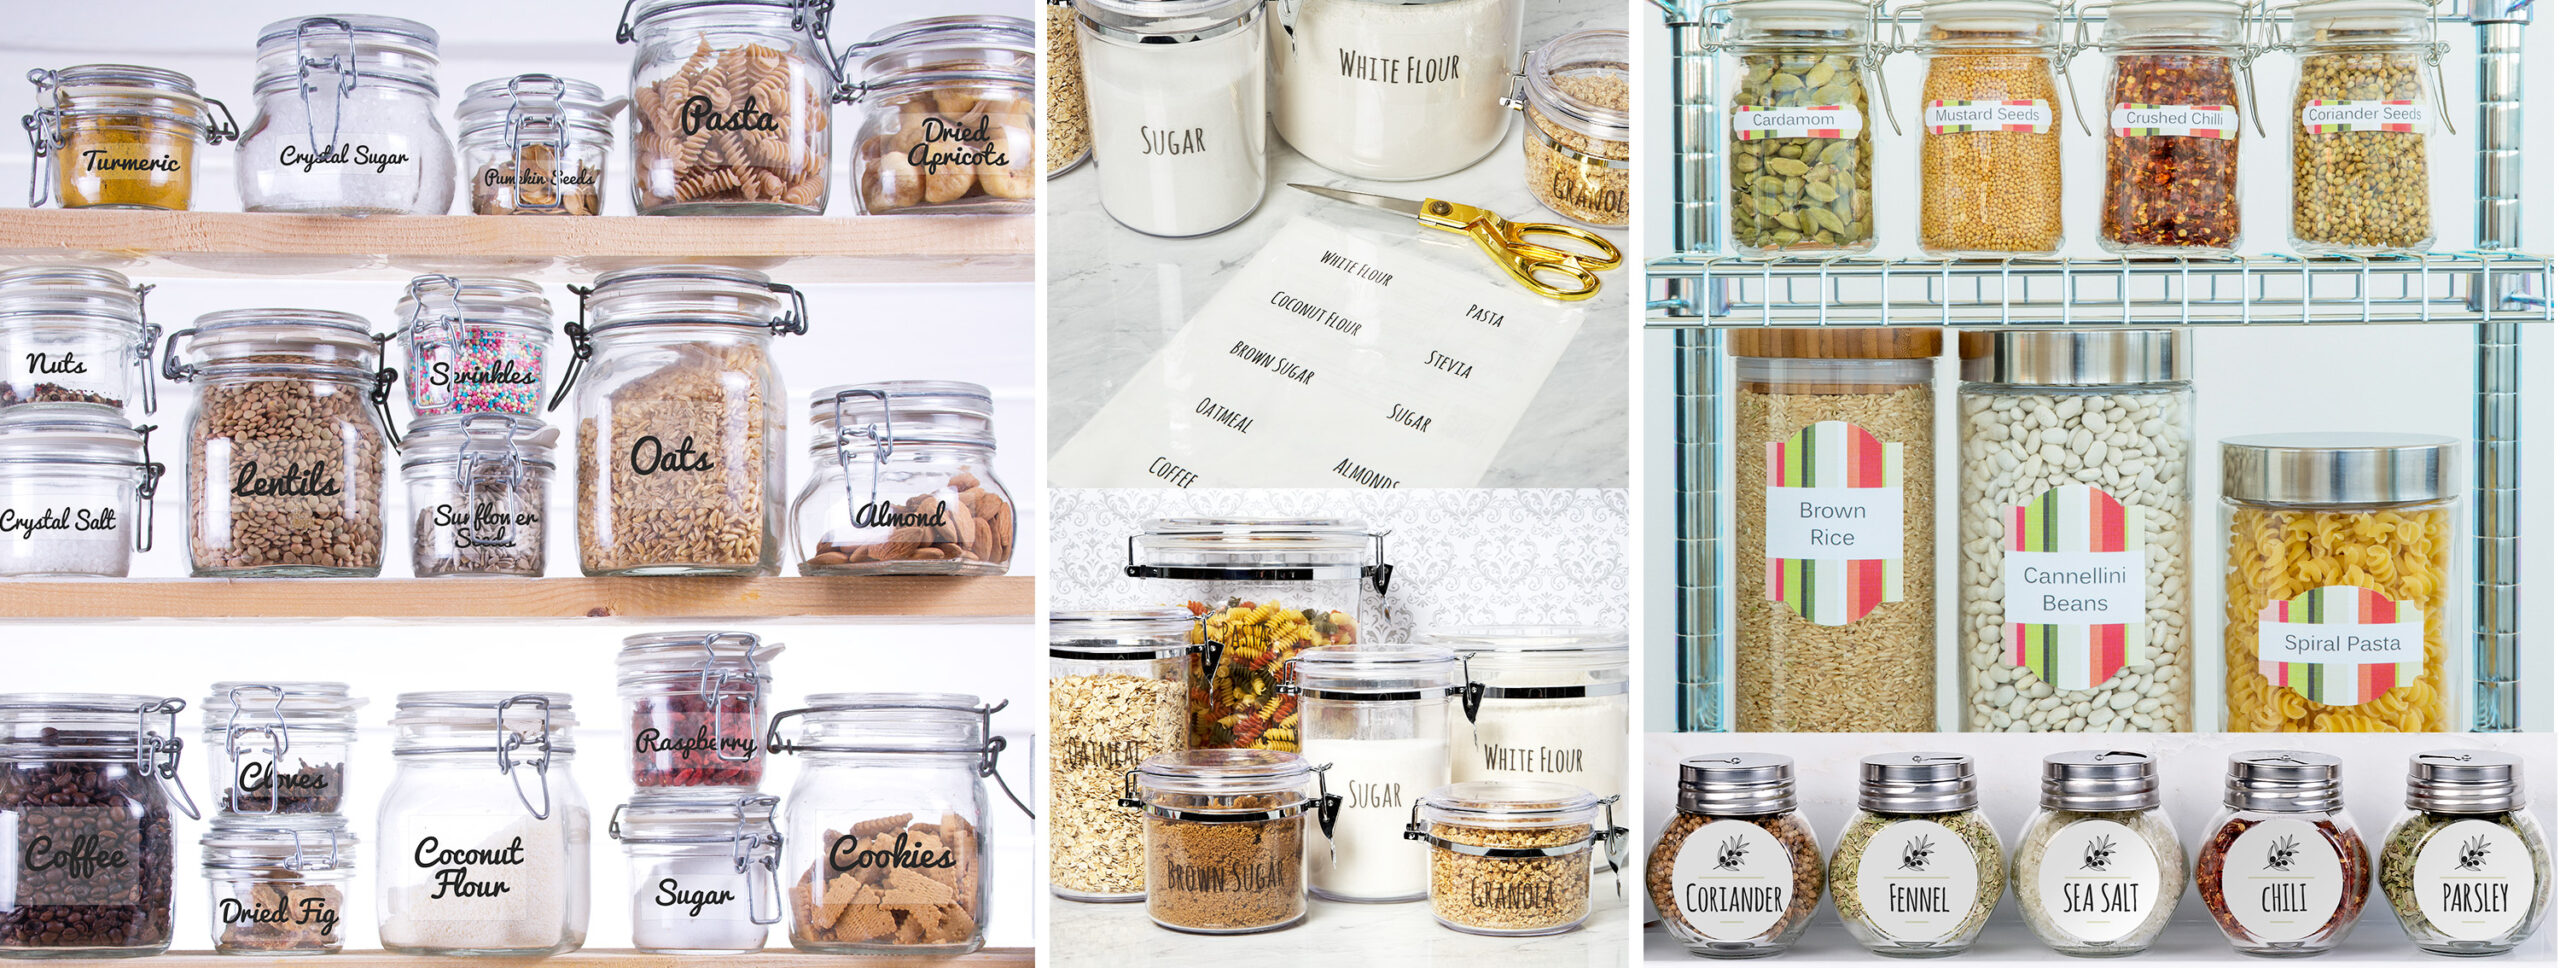 Free Printable Spice Jar Labels to Organize Your Kitchen